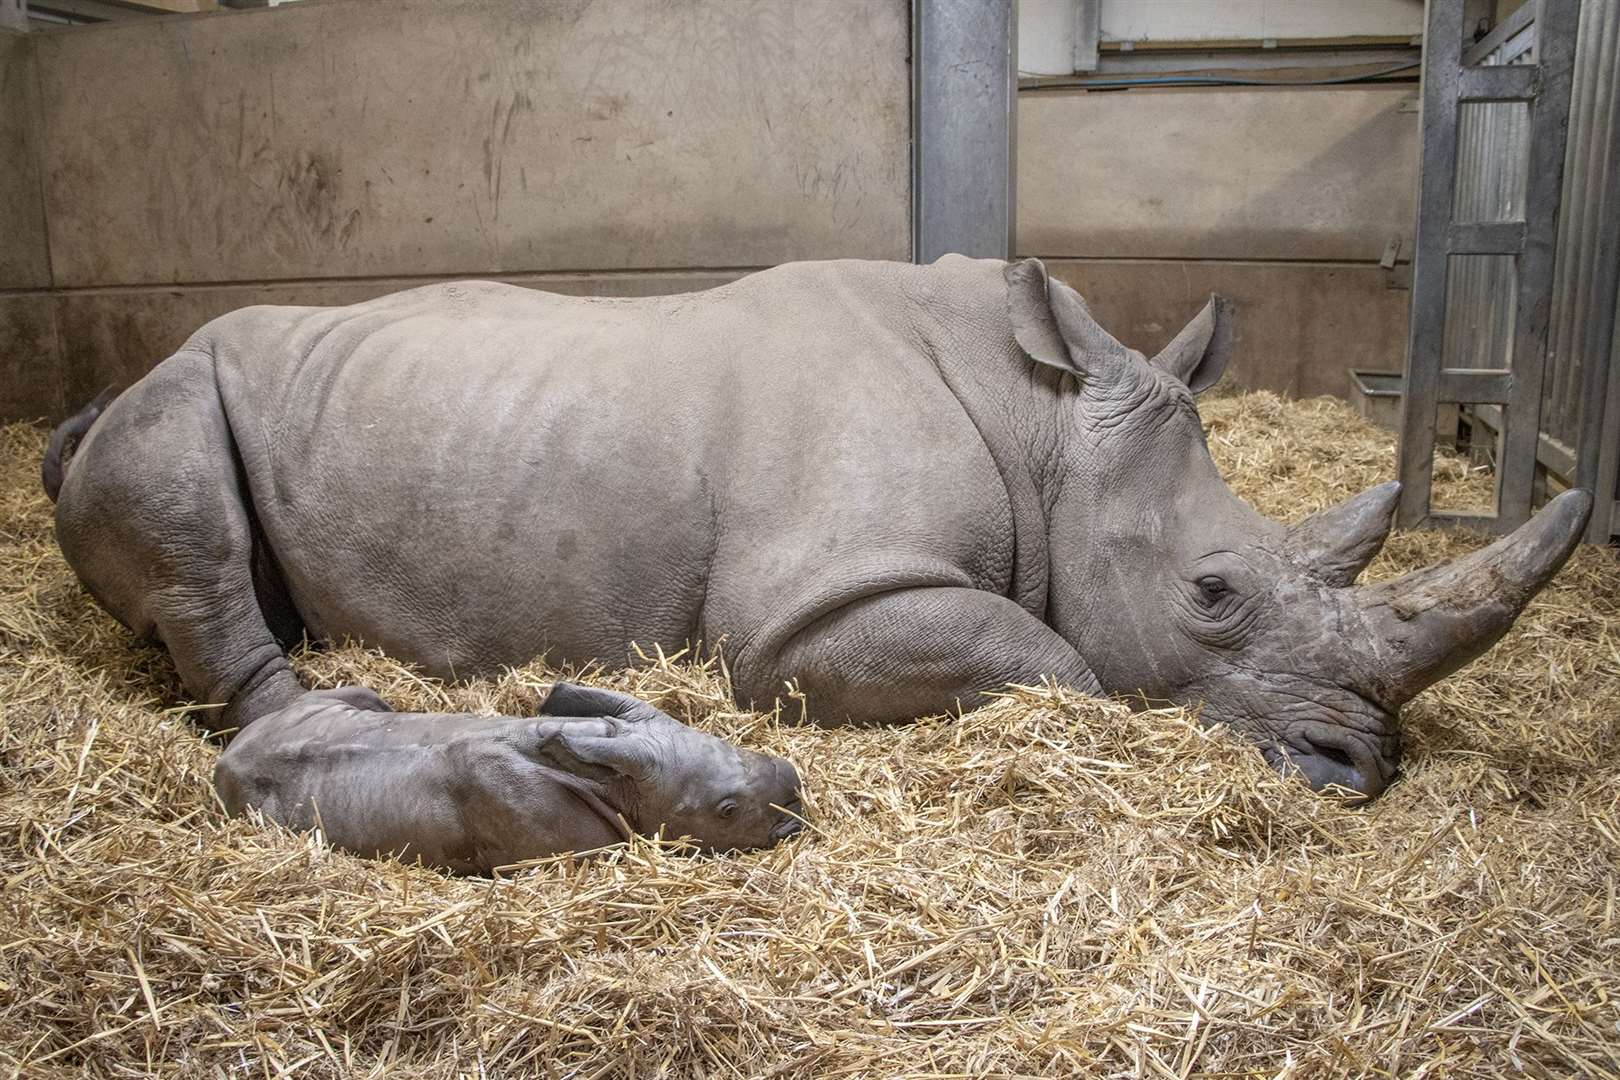 The new arrival has a snooze next to her mother Bayami (Knowsley Safari/PA)